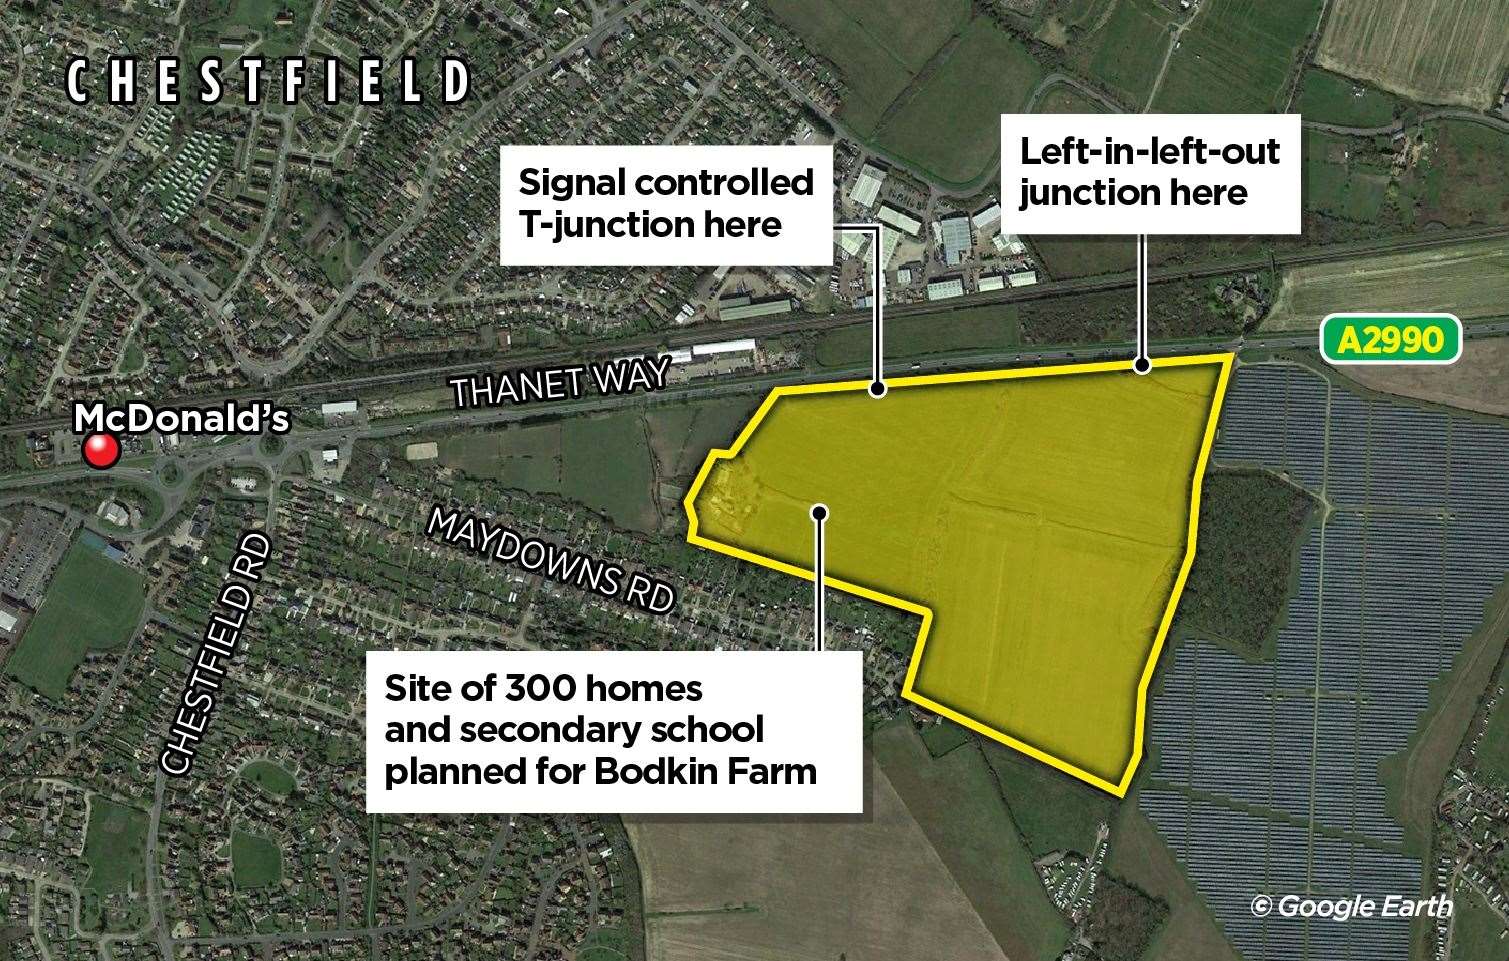 The site of the proposed development at Bodkin Farm and the access points.